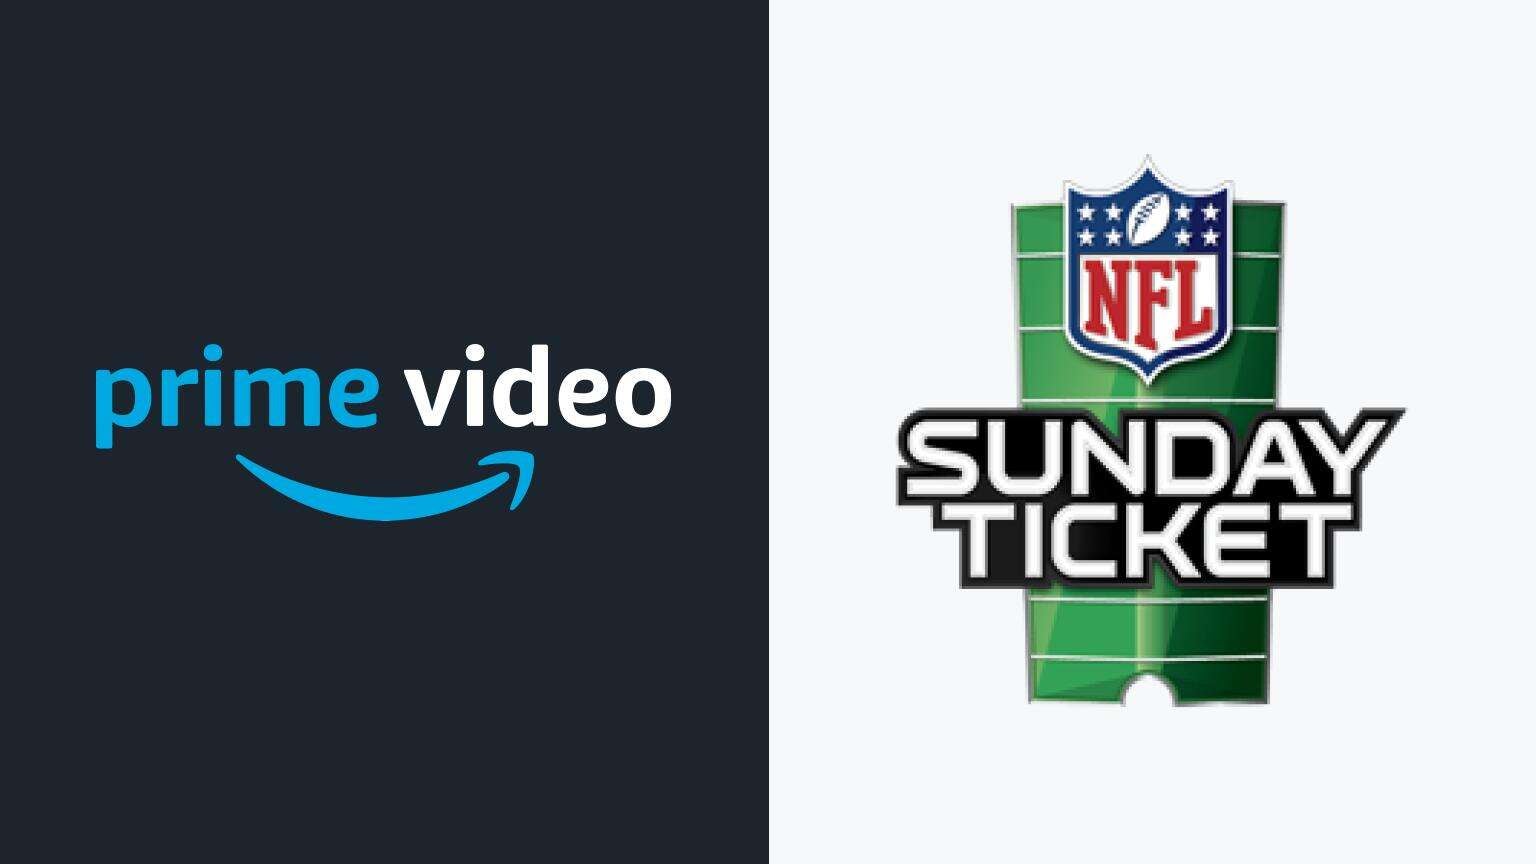 Prime Video Eyeing NFL's 'Sunday Ticket' Rights - Media